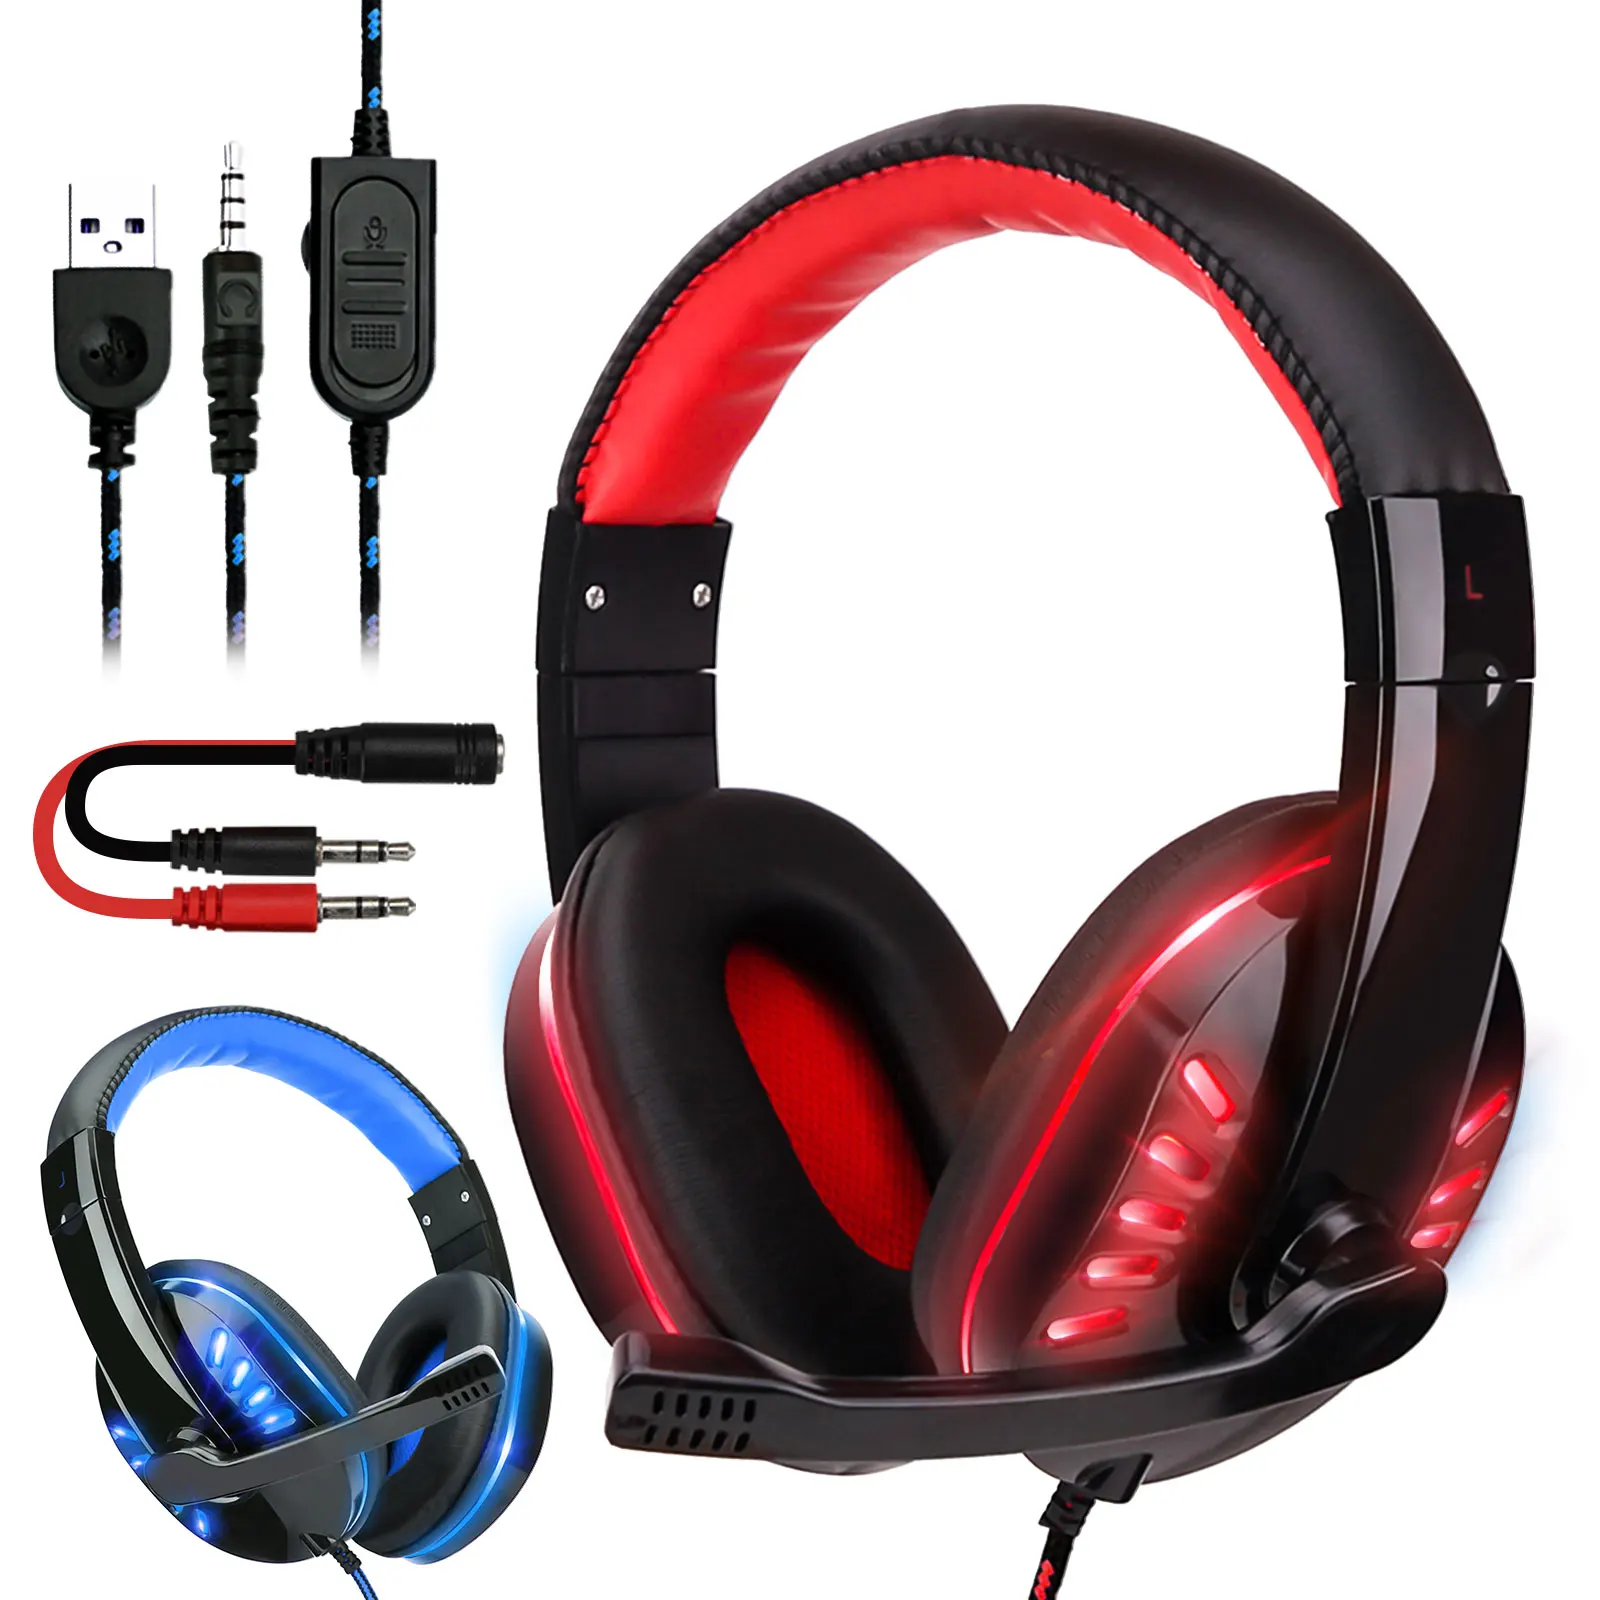 

Universal wired computer PS4 luminous game headset headset with microphone gaming noise reduction cover ear headset